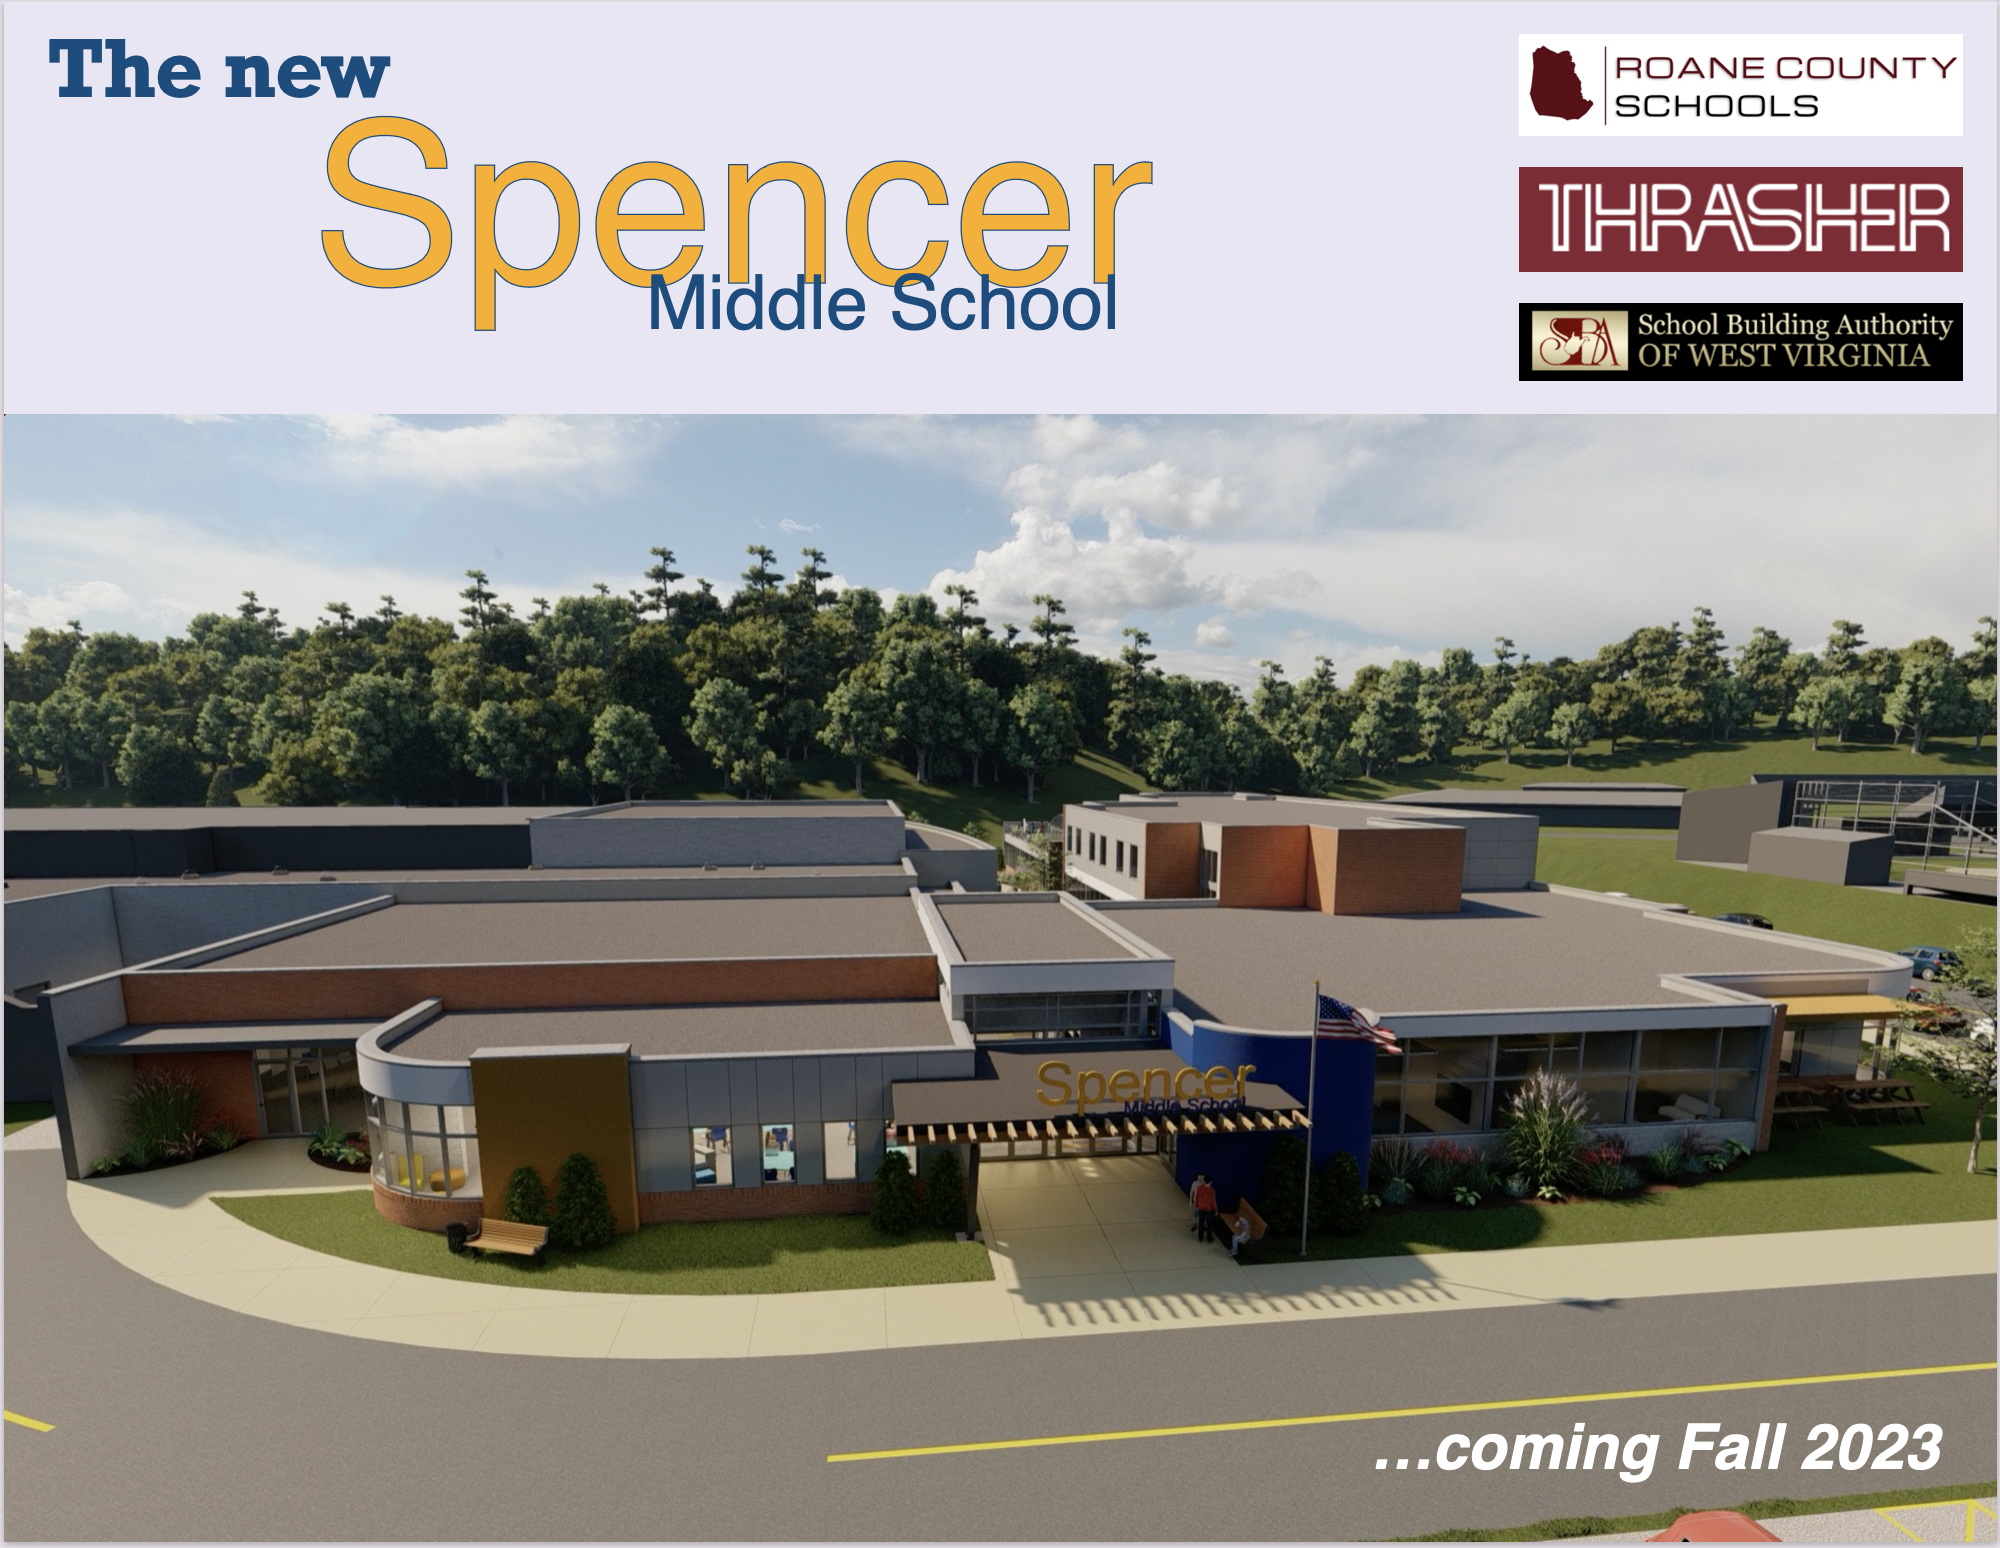 The new Spencer Middle School